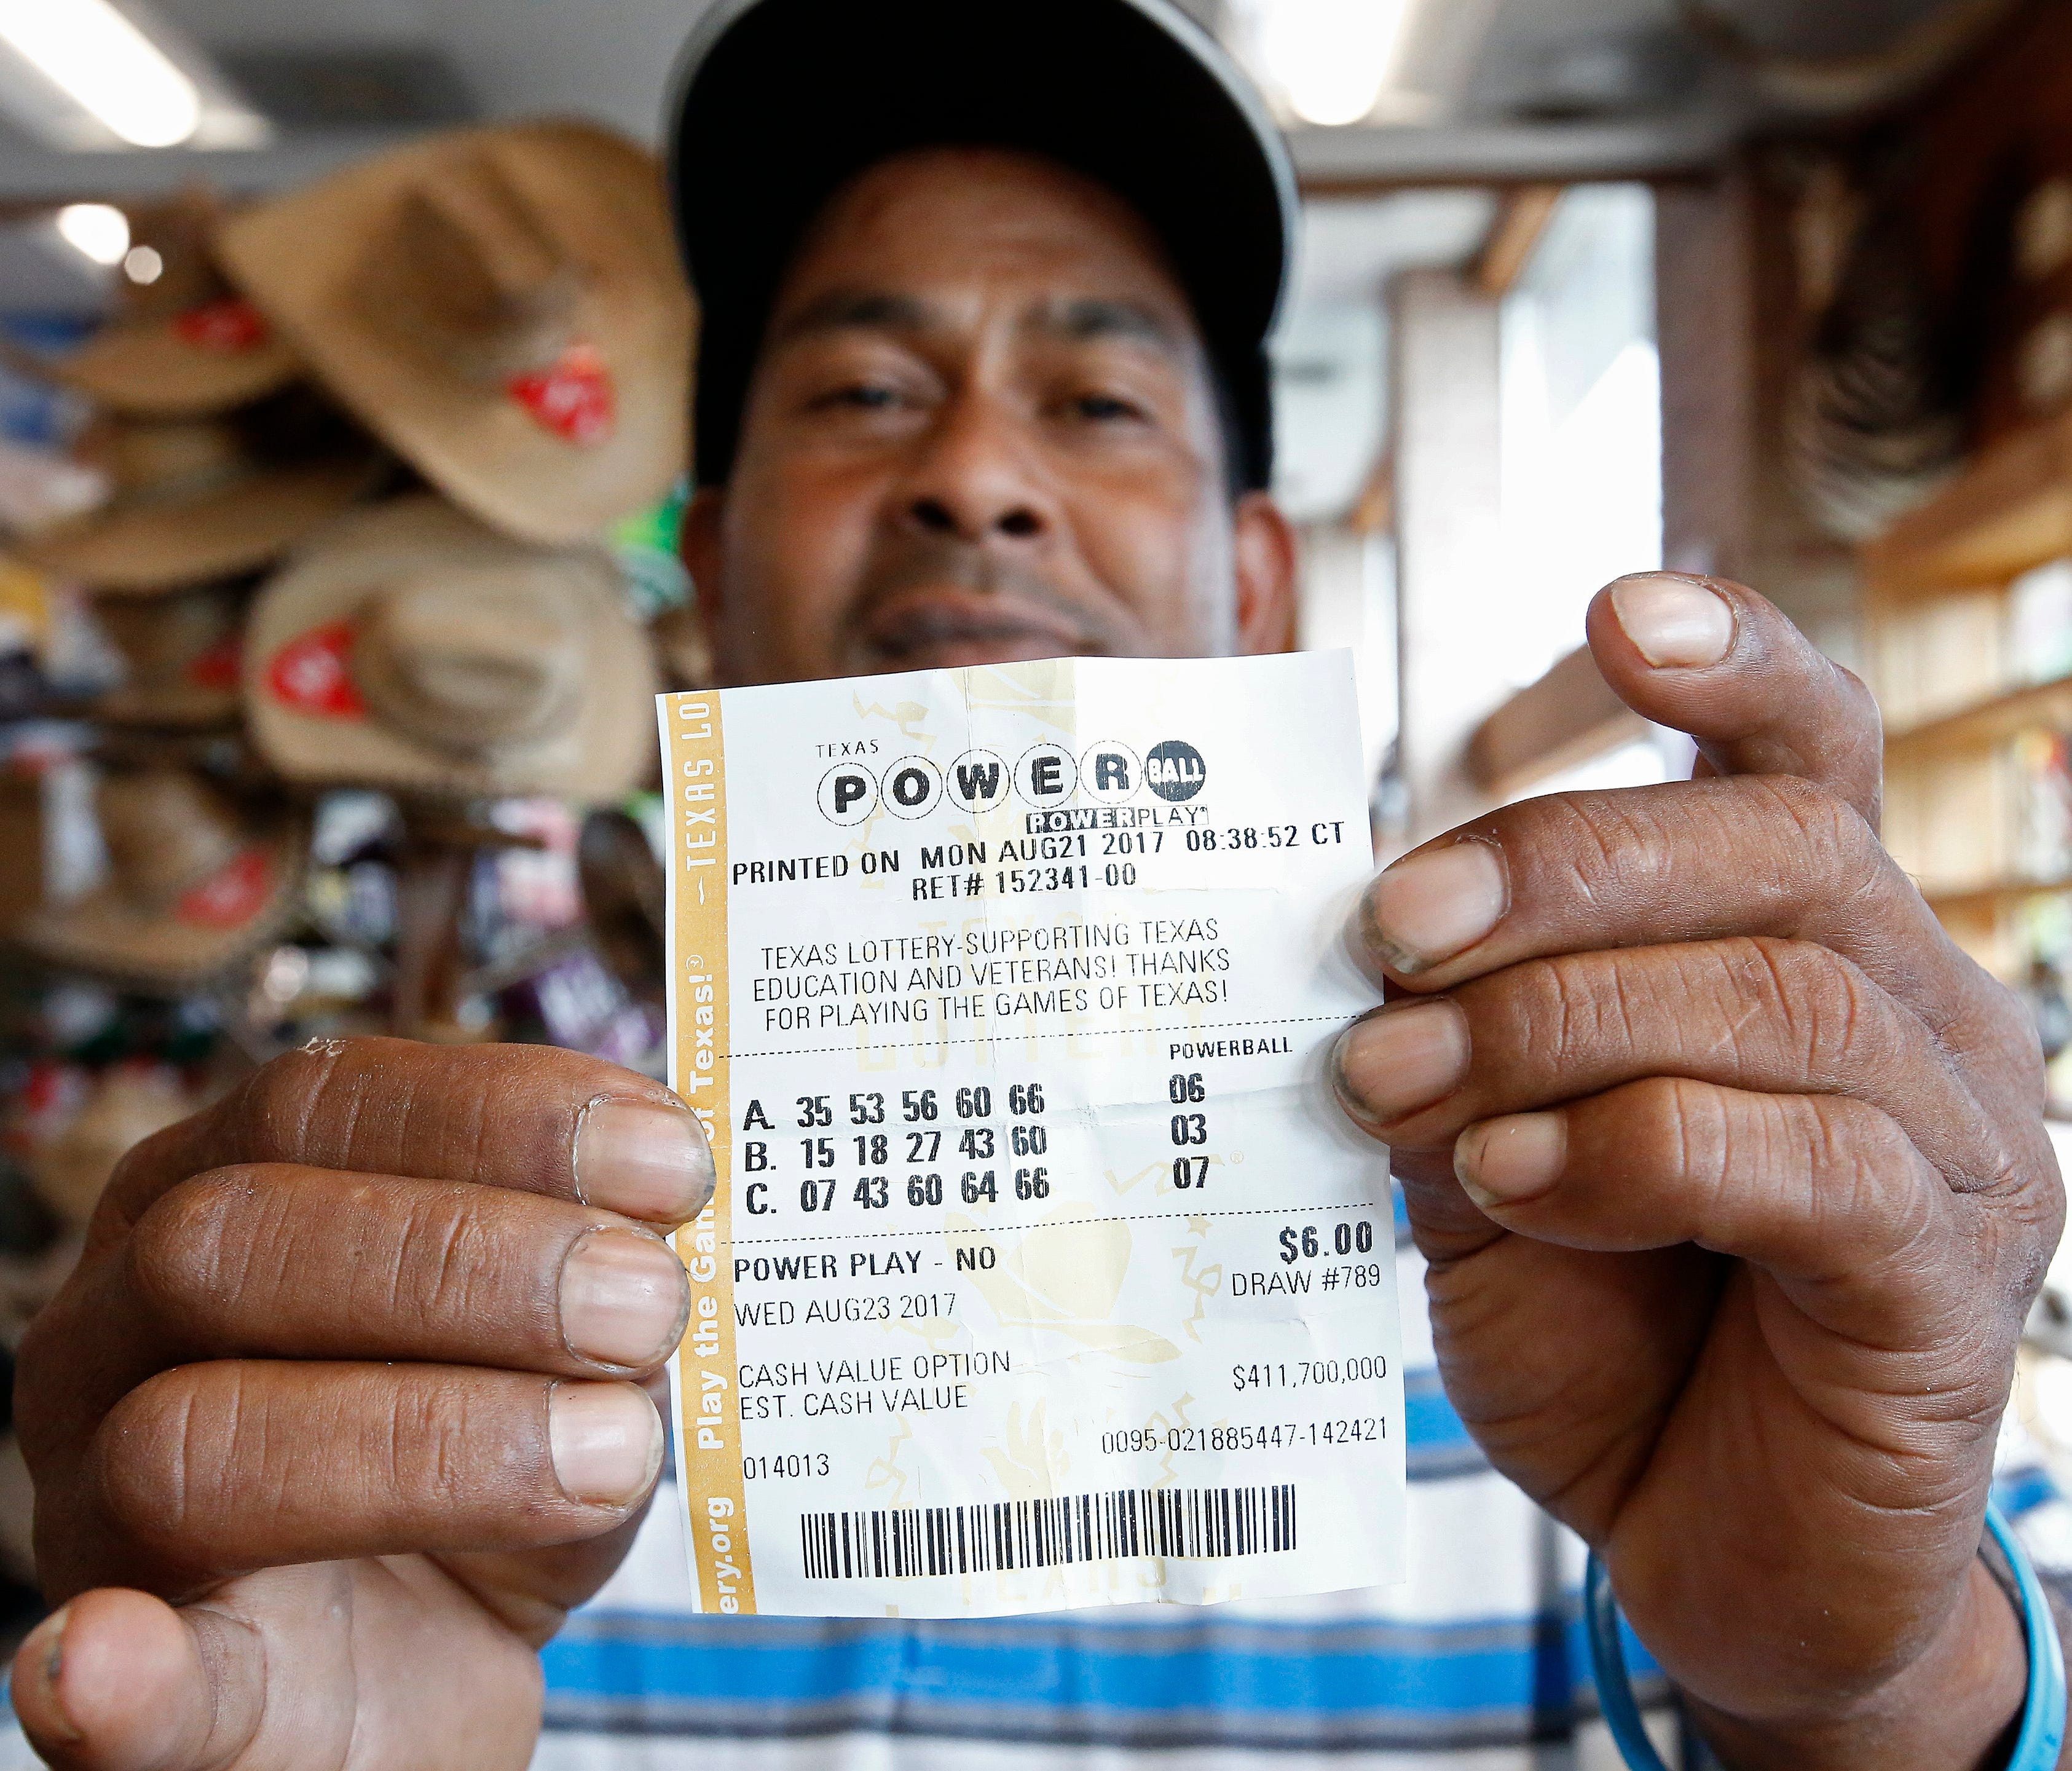 This man in Dallas TX holds up a Powerball lottery ticket he purchased at a gas station Aug. 23, 2017. The Powerball is at $700.